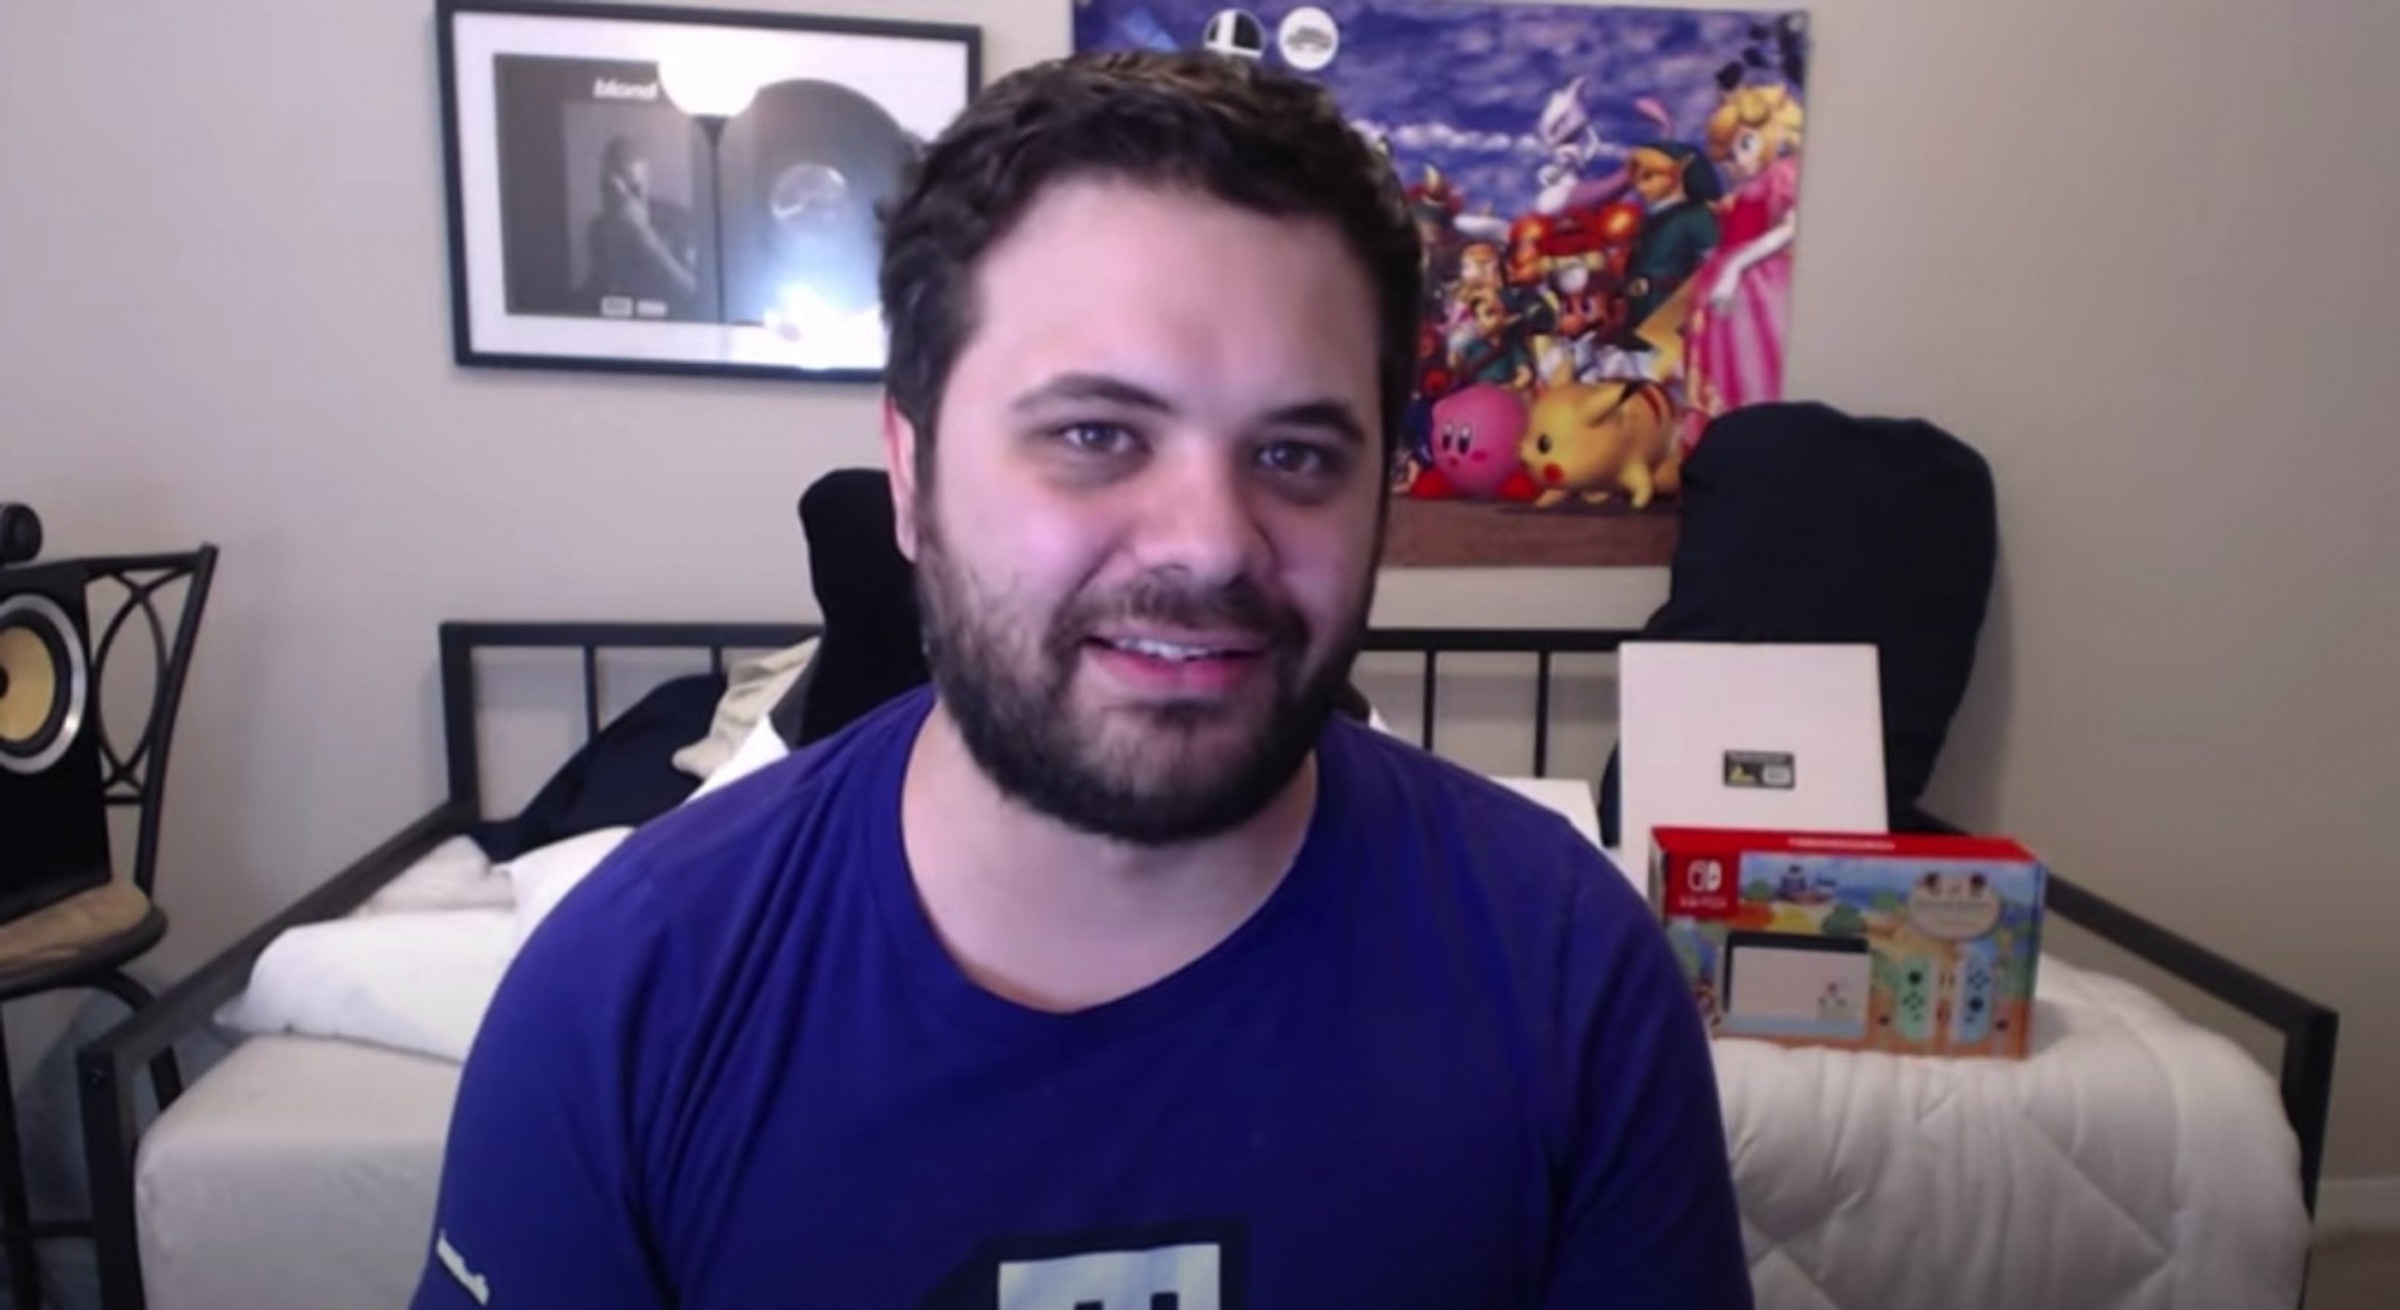 hungrybox on X: what's interesting is that there was a dream face